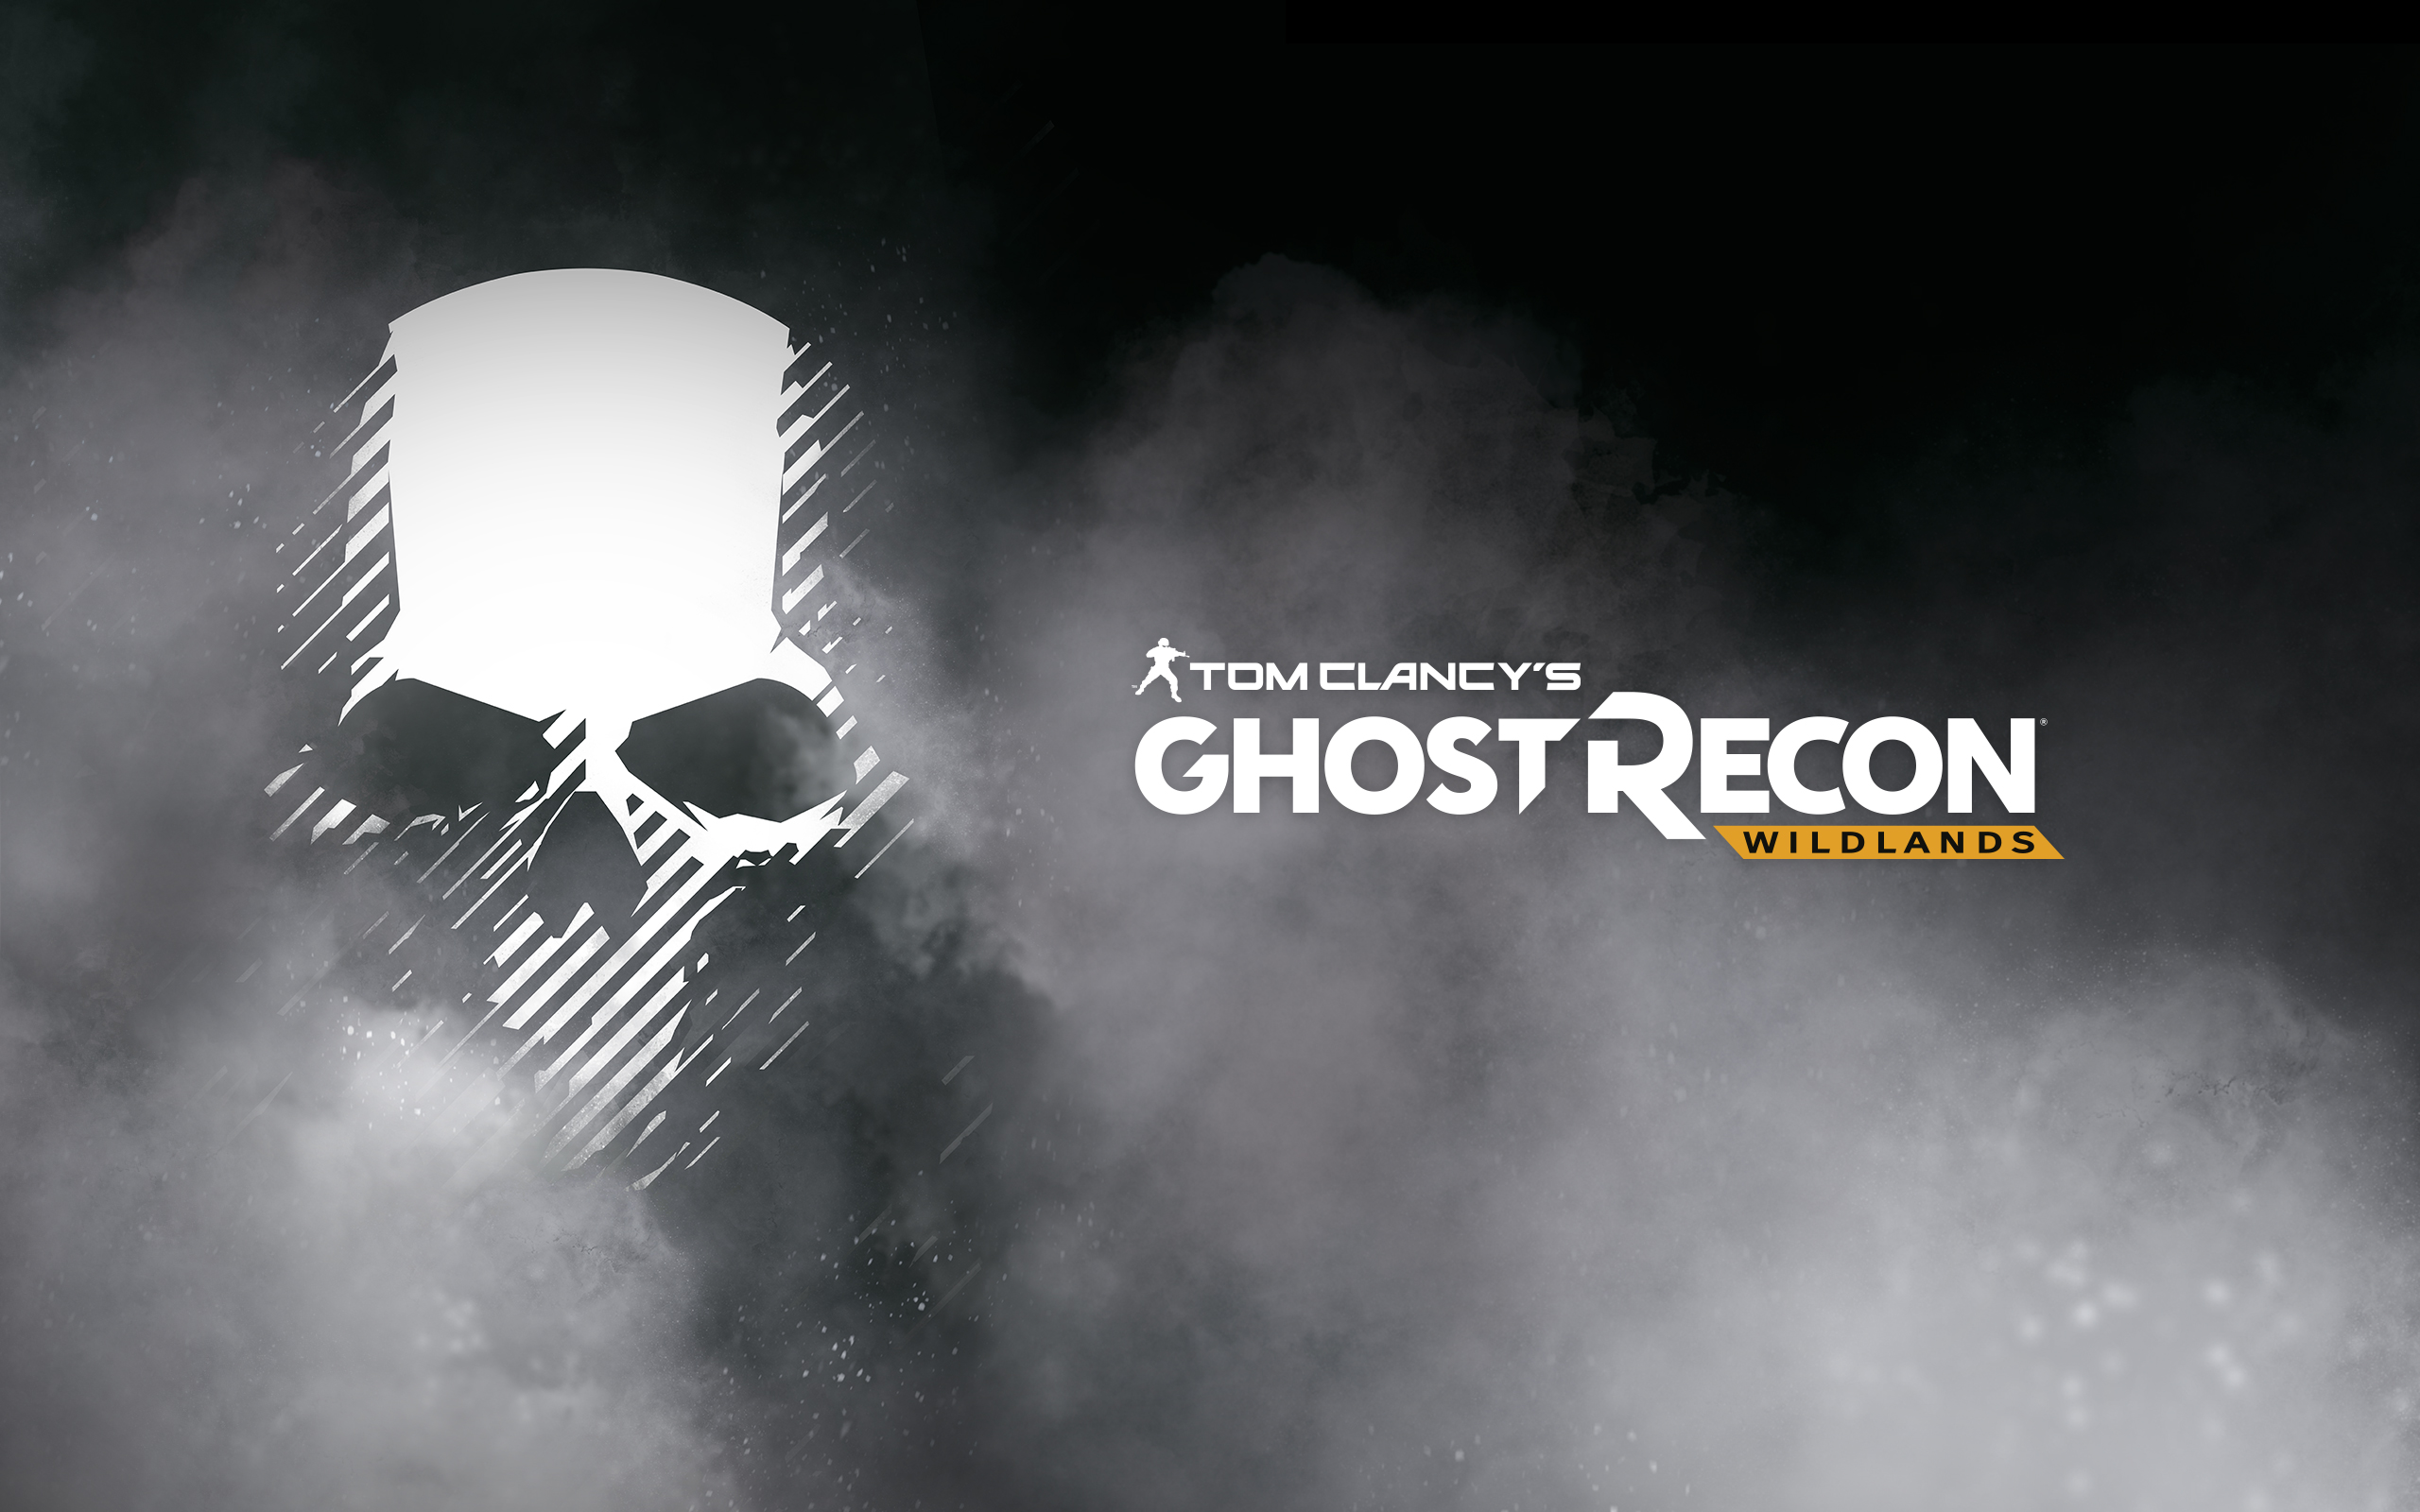 Cool Wallpapers tom clancy's ghost recon wildlands, video game, tom clancy’s ghost recon wildlands, skull